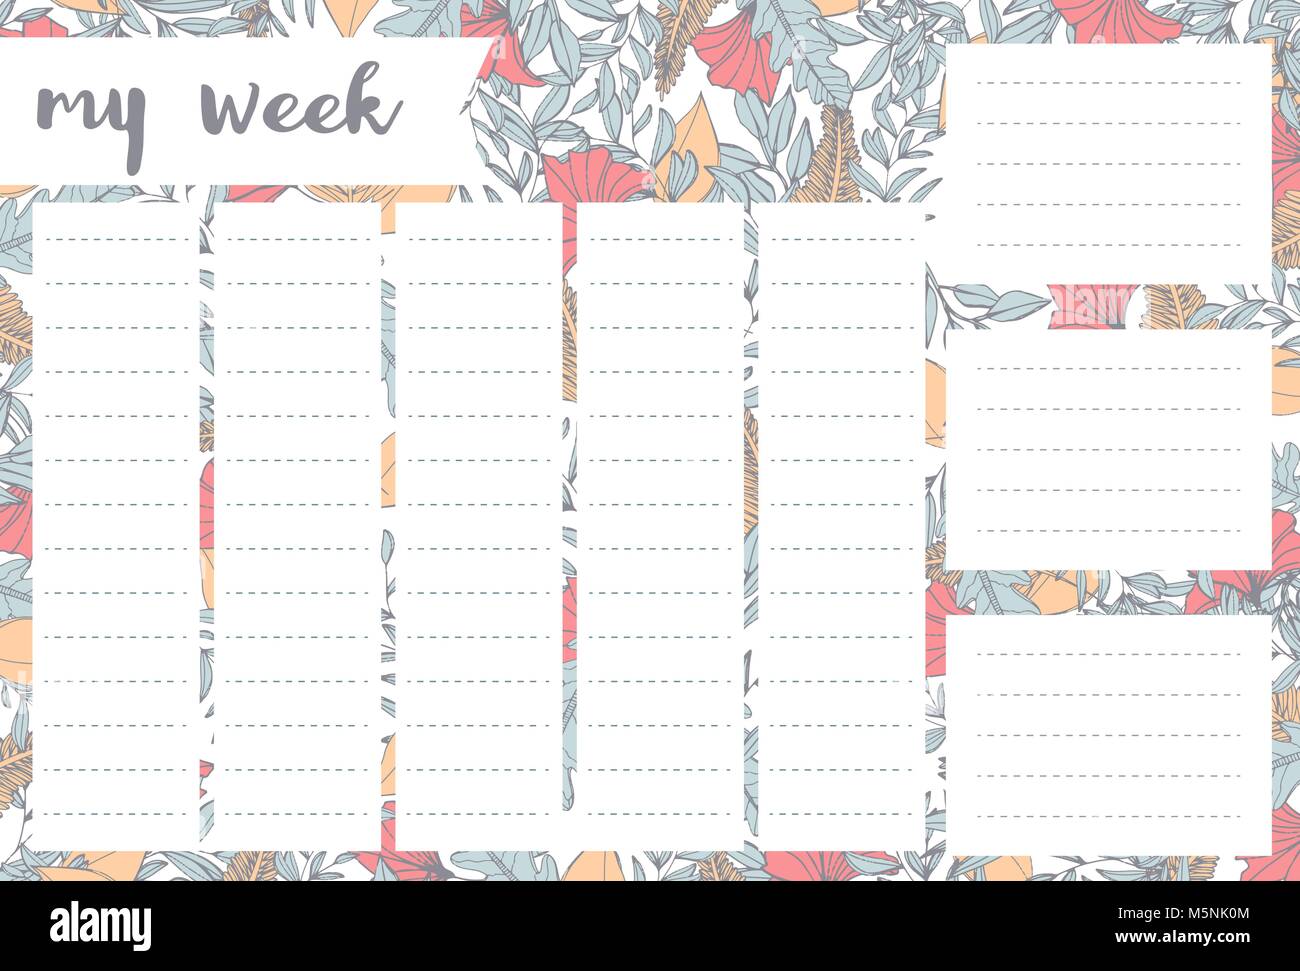 Weekly planner with flowers, stationery organizer for daily plans, floral vector weekly planner template, schedules Stock Vector